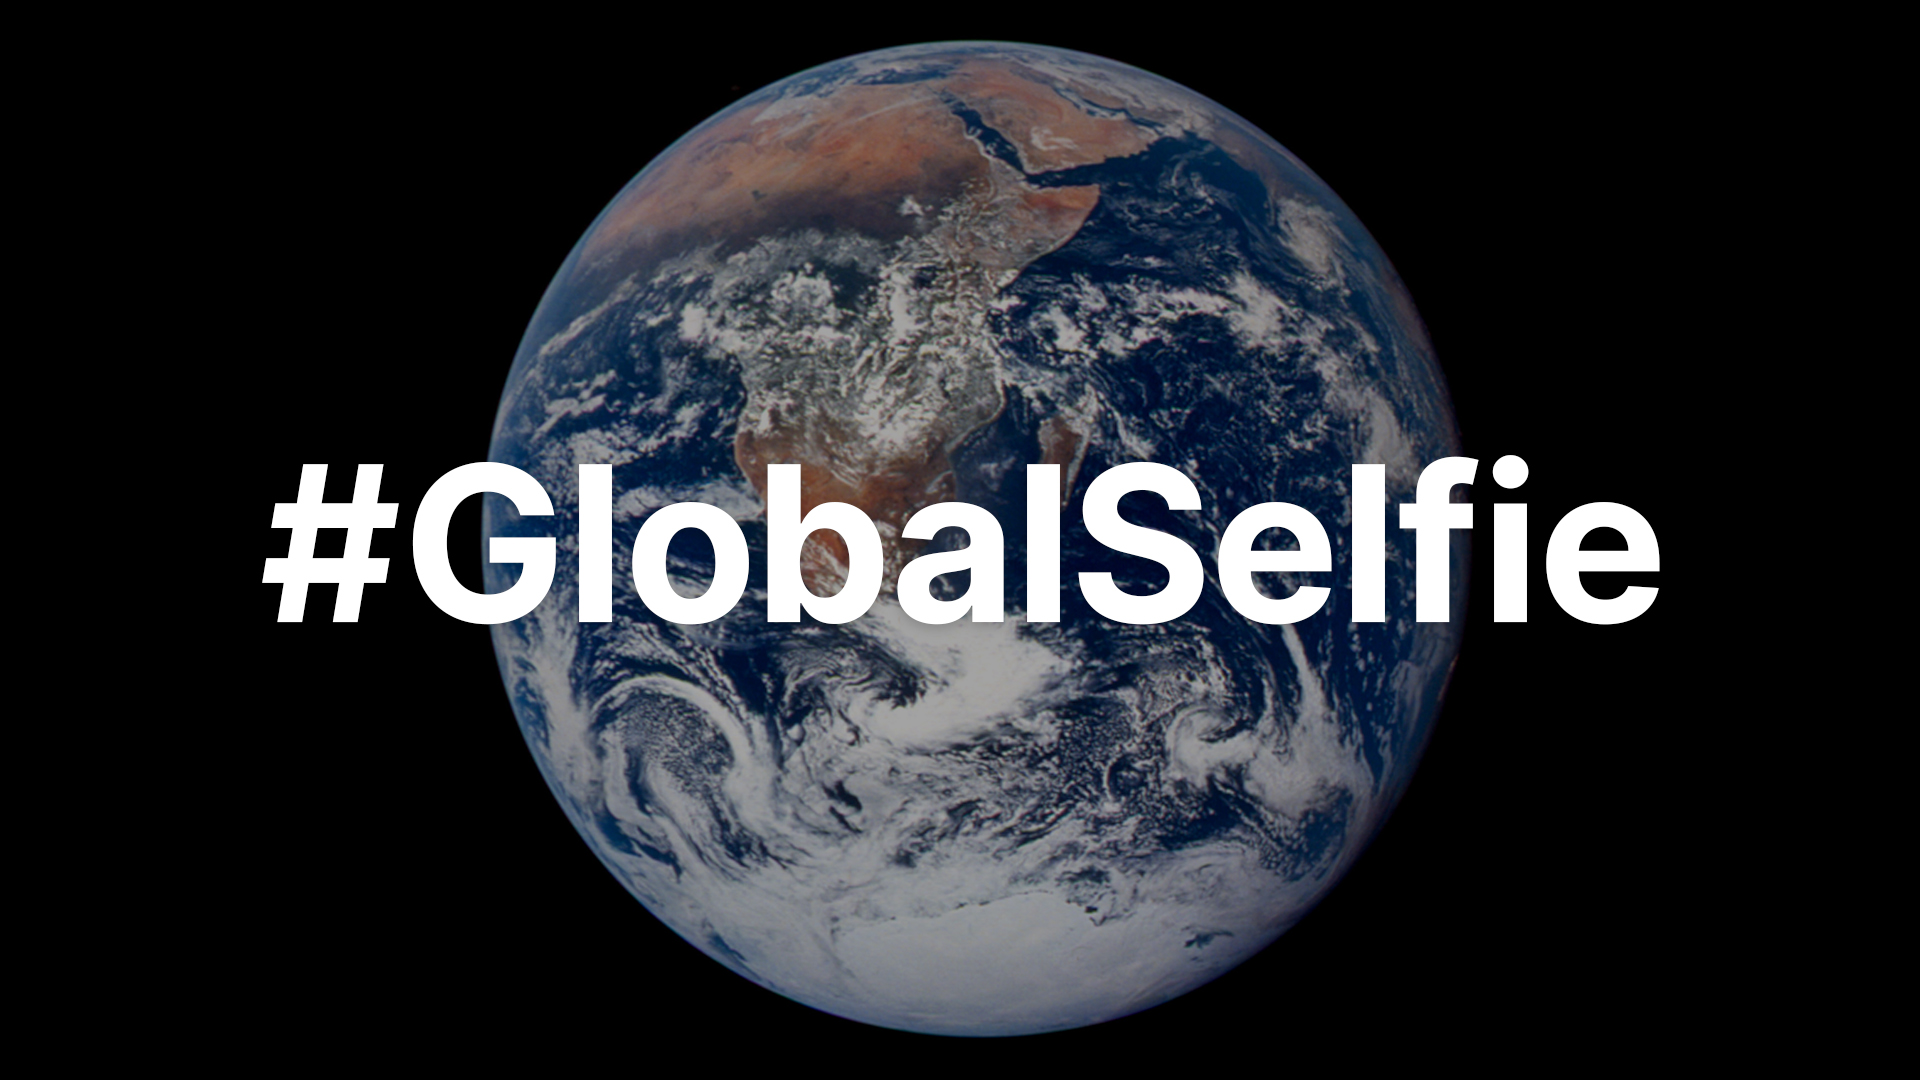 The globe of the Earth is visible against a black background. Overlaid in white lettering is "#GlobalSelfie."